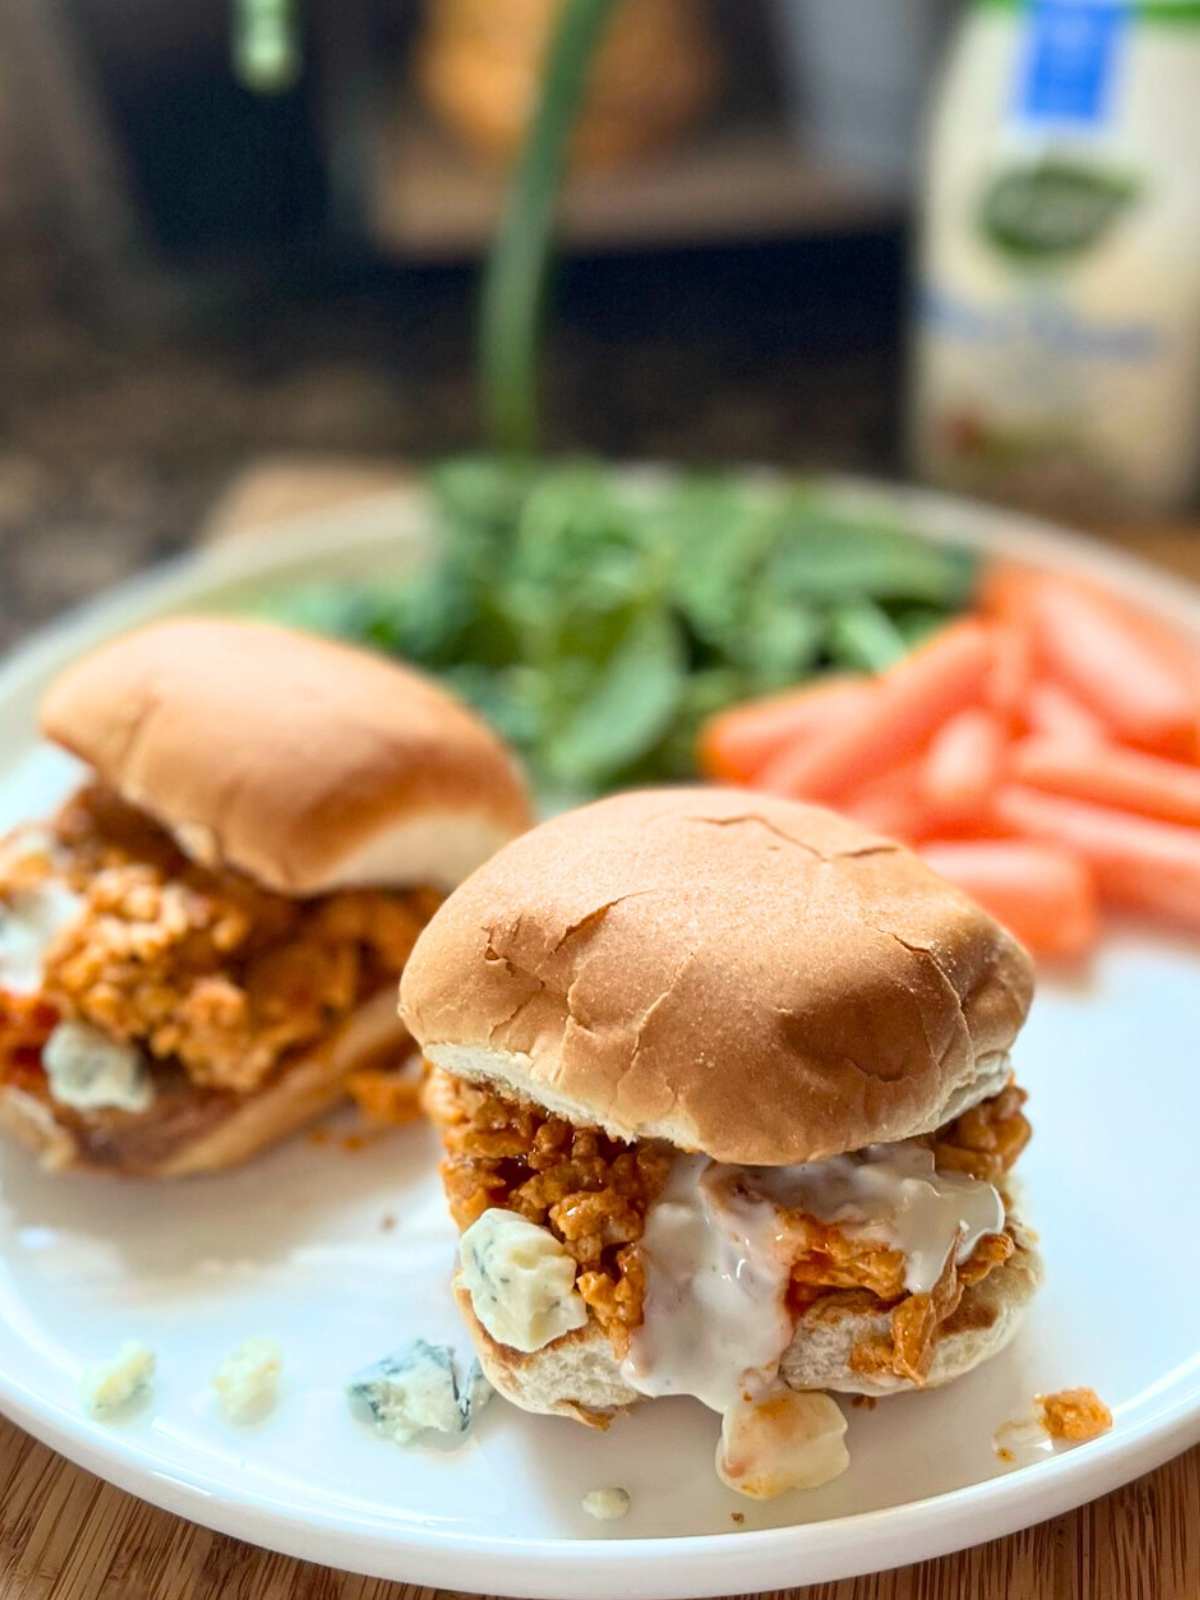 A white plate with two chicken sliders on it. There is also carrot and salad blurred behind the sliders. There is dressing dripping from the sliders.